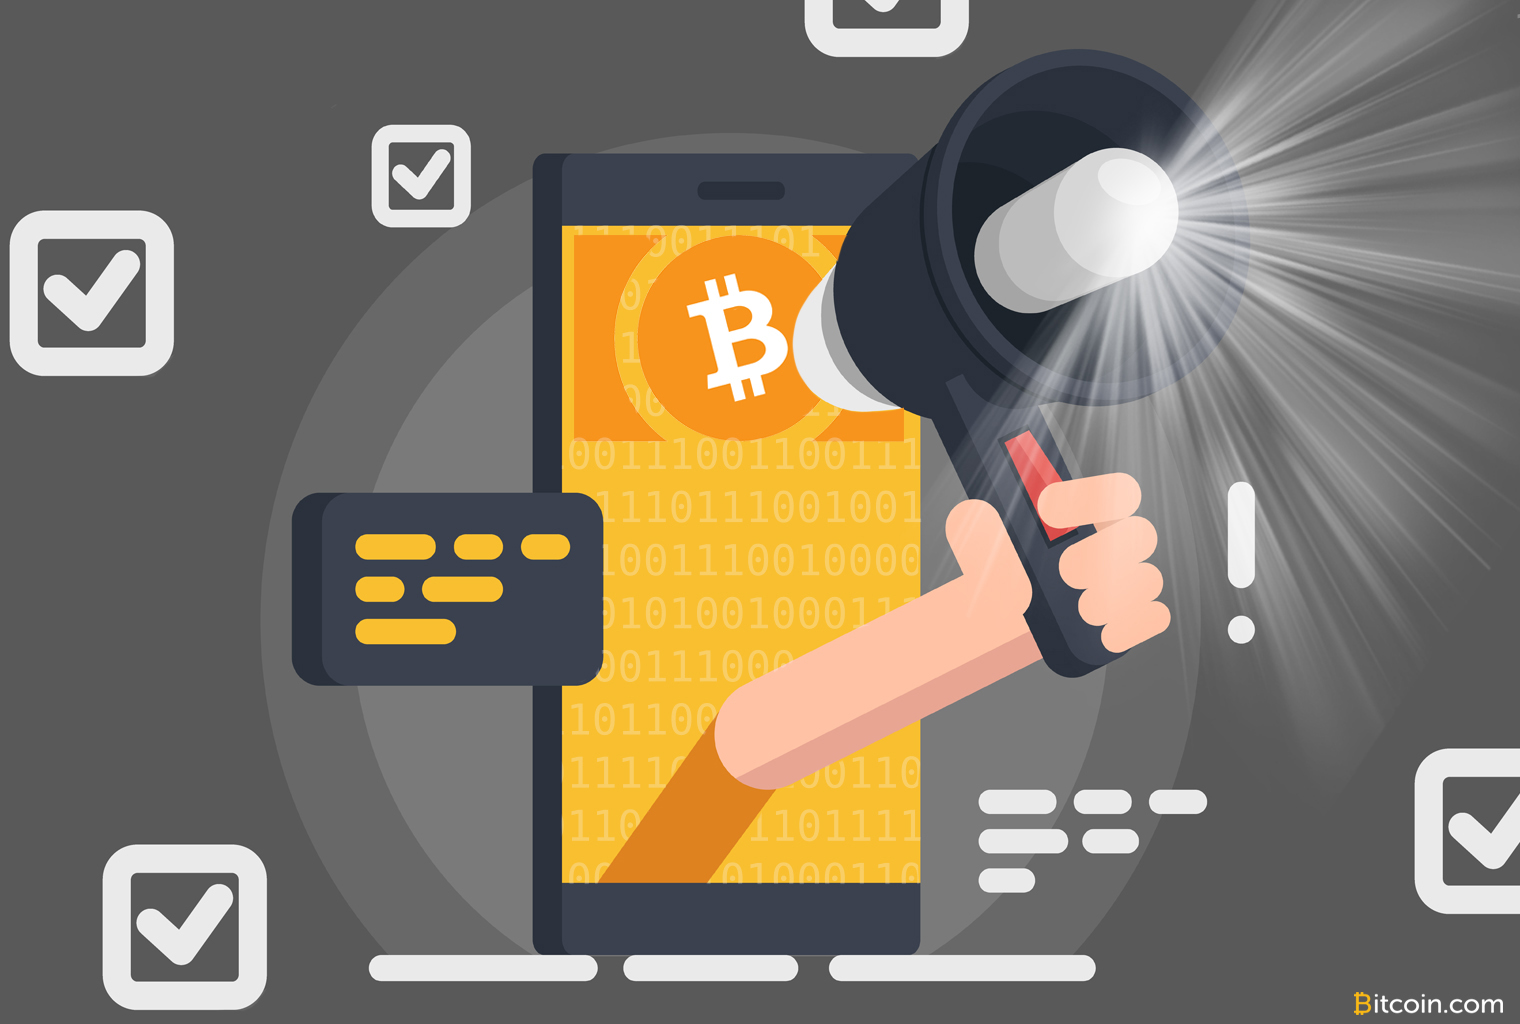 Bitcoin ads pay cryptocurrency tax fifo or lifo